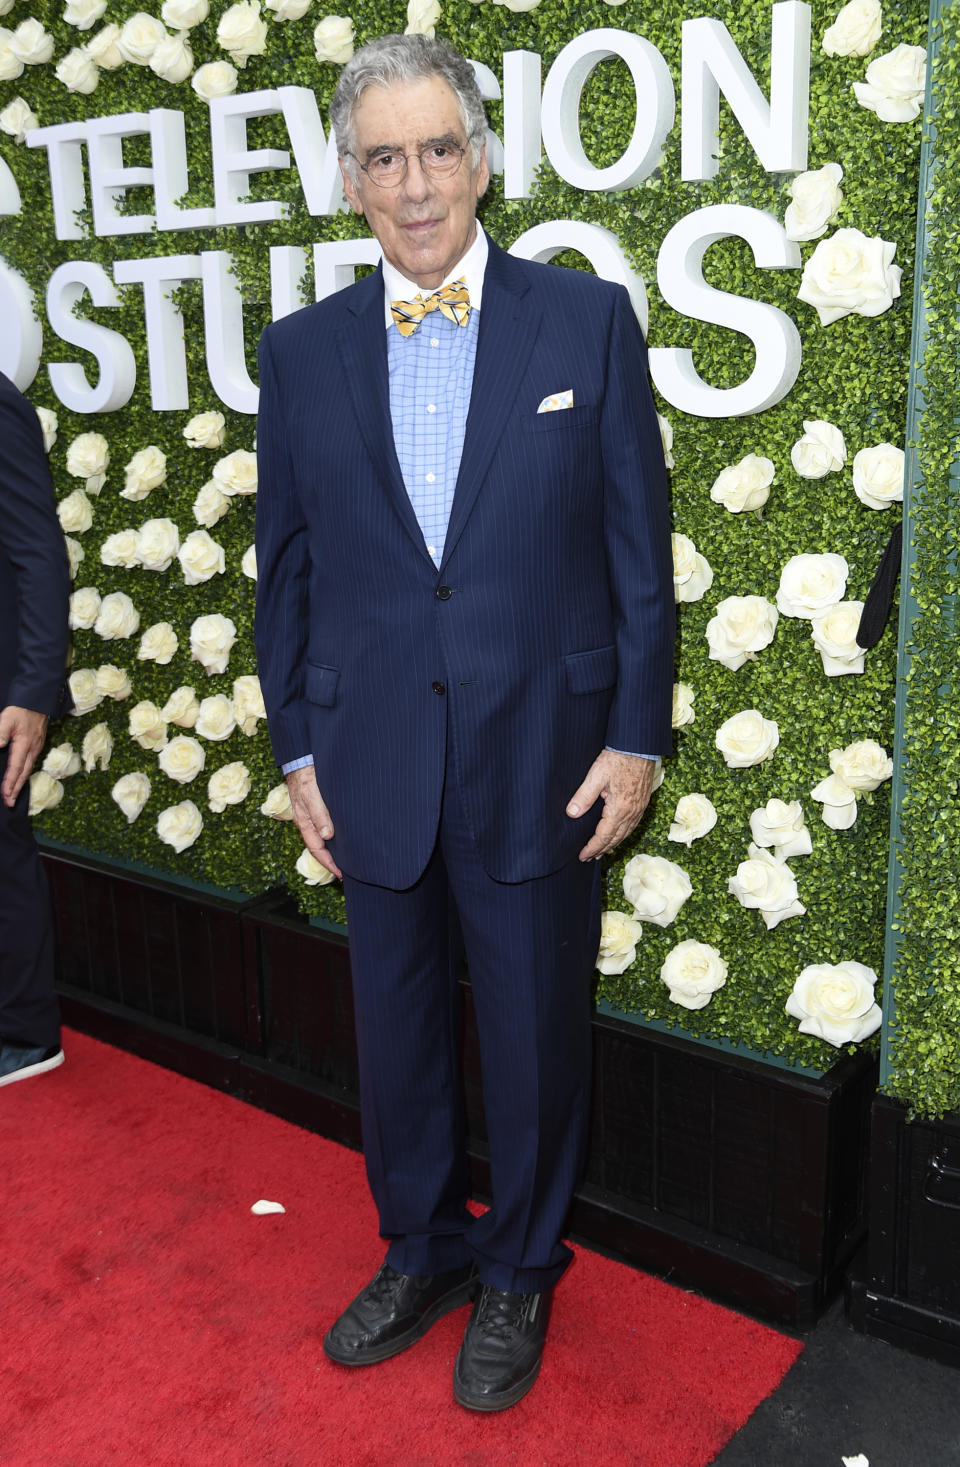 FILE - Elliott Gould attends the CBS Summer Soiree during the Summer TCA's on Aug. 1, 2017, in Los Angeles. Gould turns 84 on Aug. 29. (Photo by Richard Shotwell/Invision/AP, File)